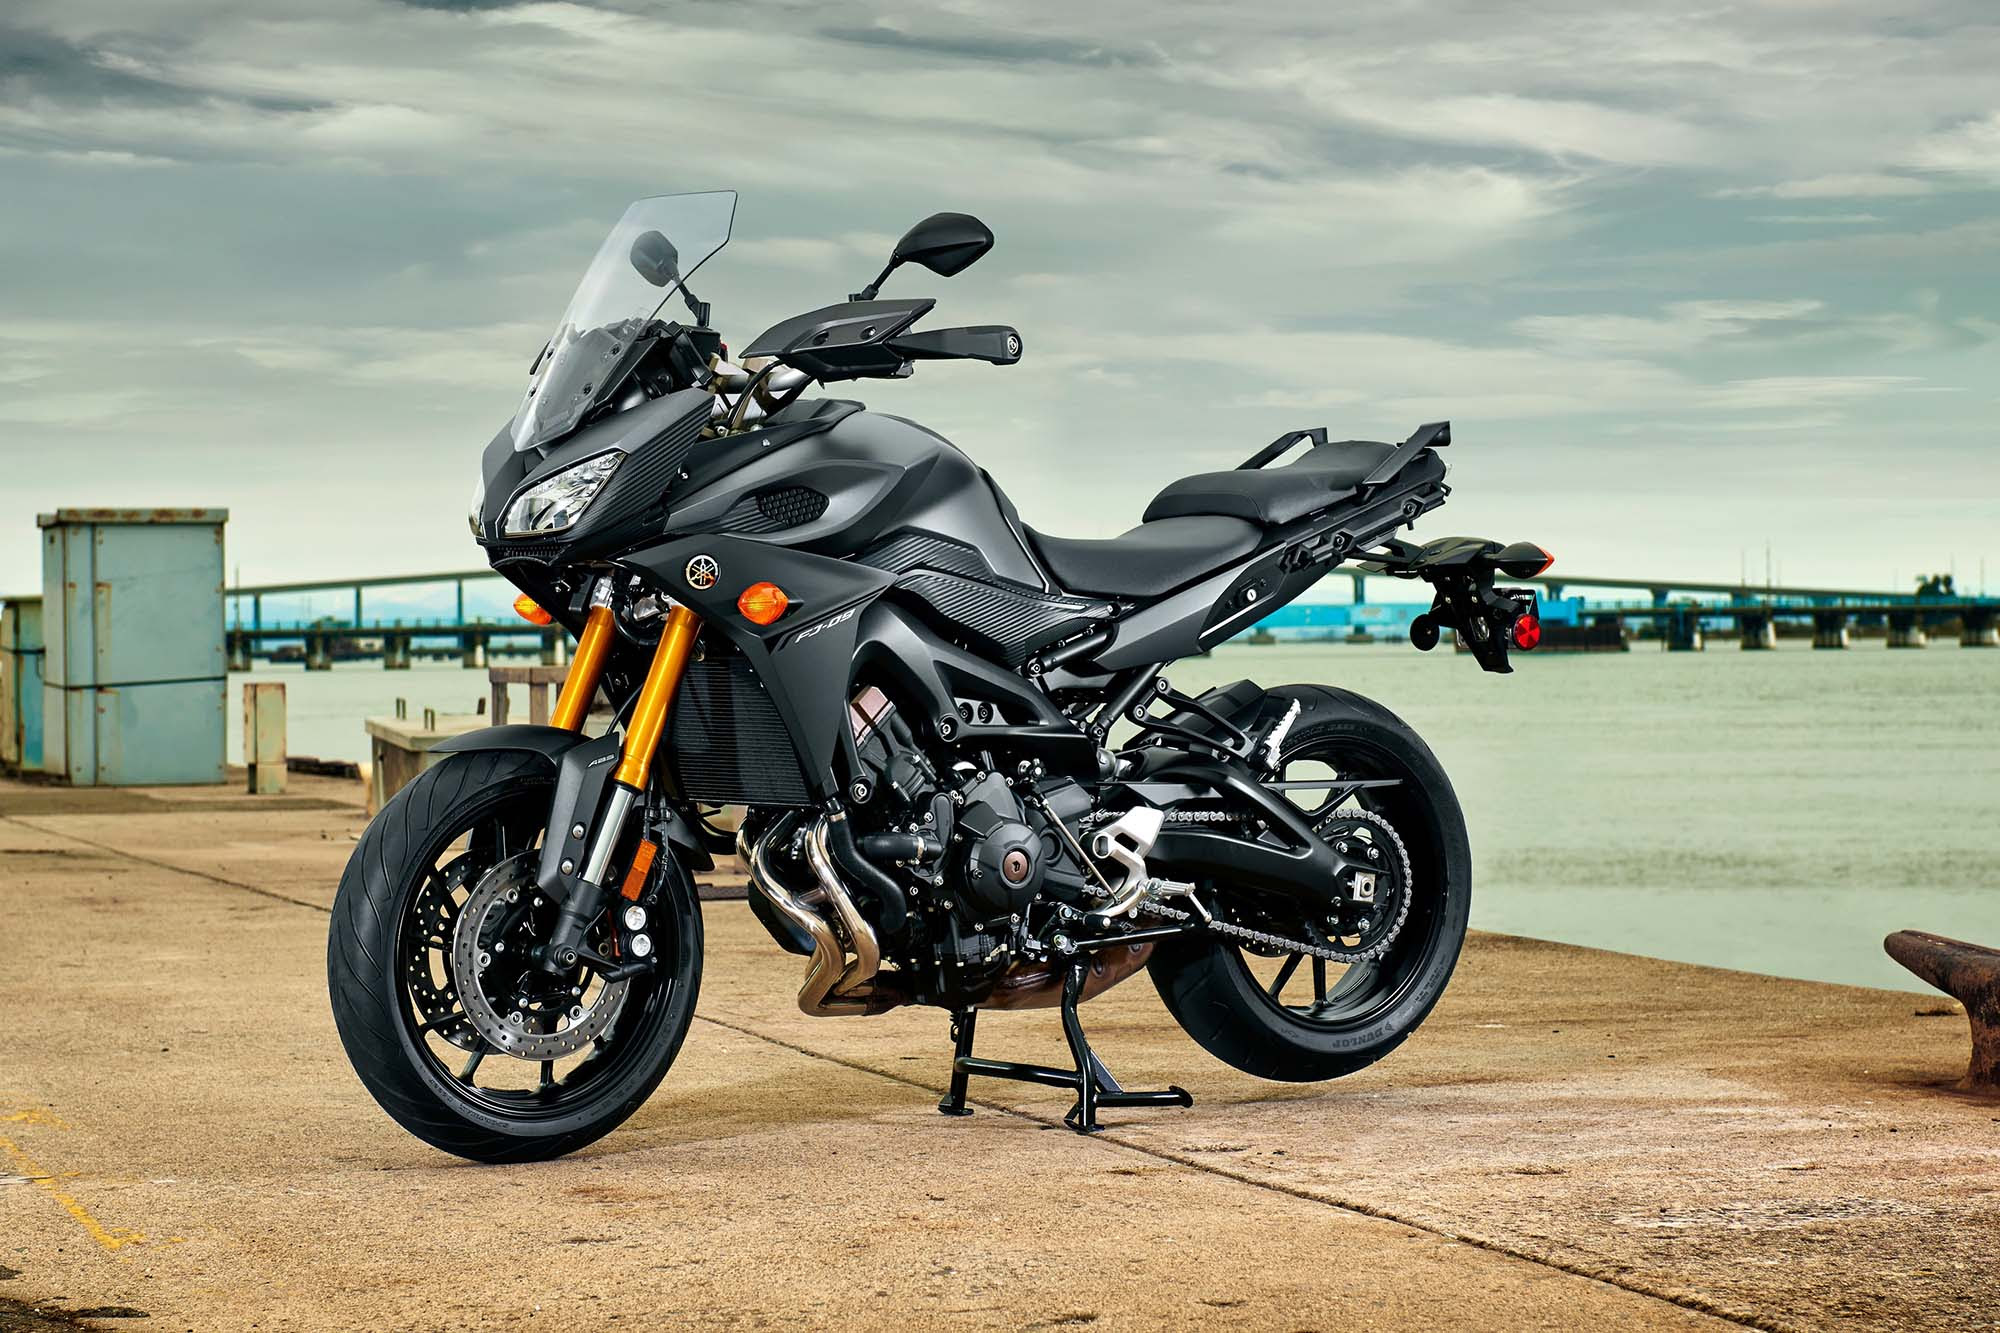 R6shifter Blog : Yamaha MT-09 Tracer it is! ..and the 700 just came out